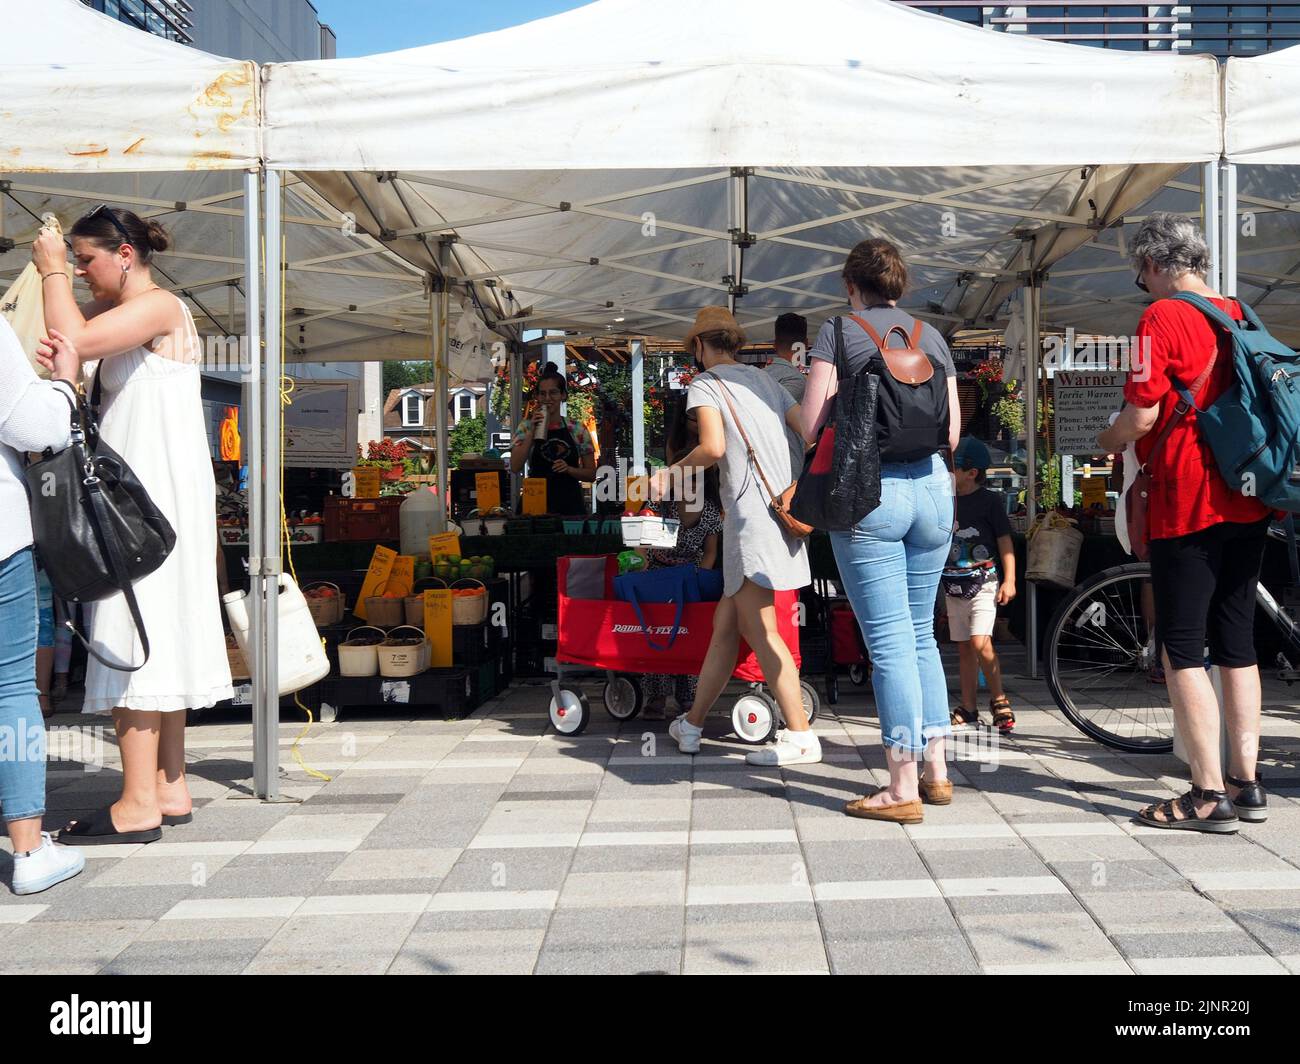 Ottawa, ON, Canada - August 07, 2022: Scenes from the Farmer's Market at Lansdowne Place. Shoppers line up at a grocery tent. Stock Photo